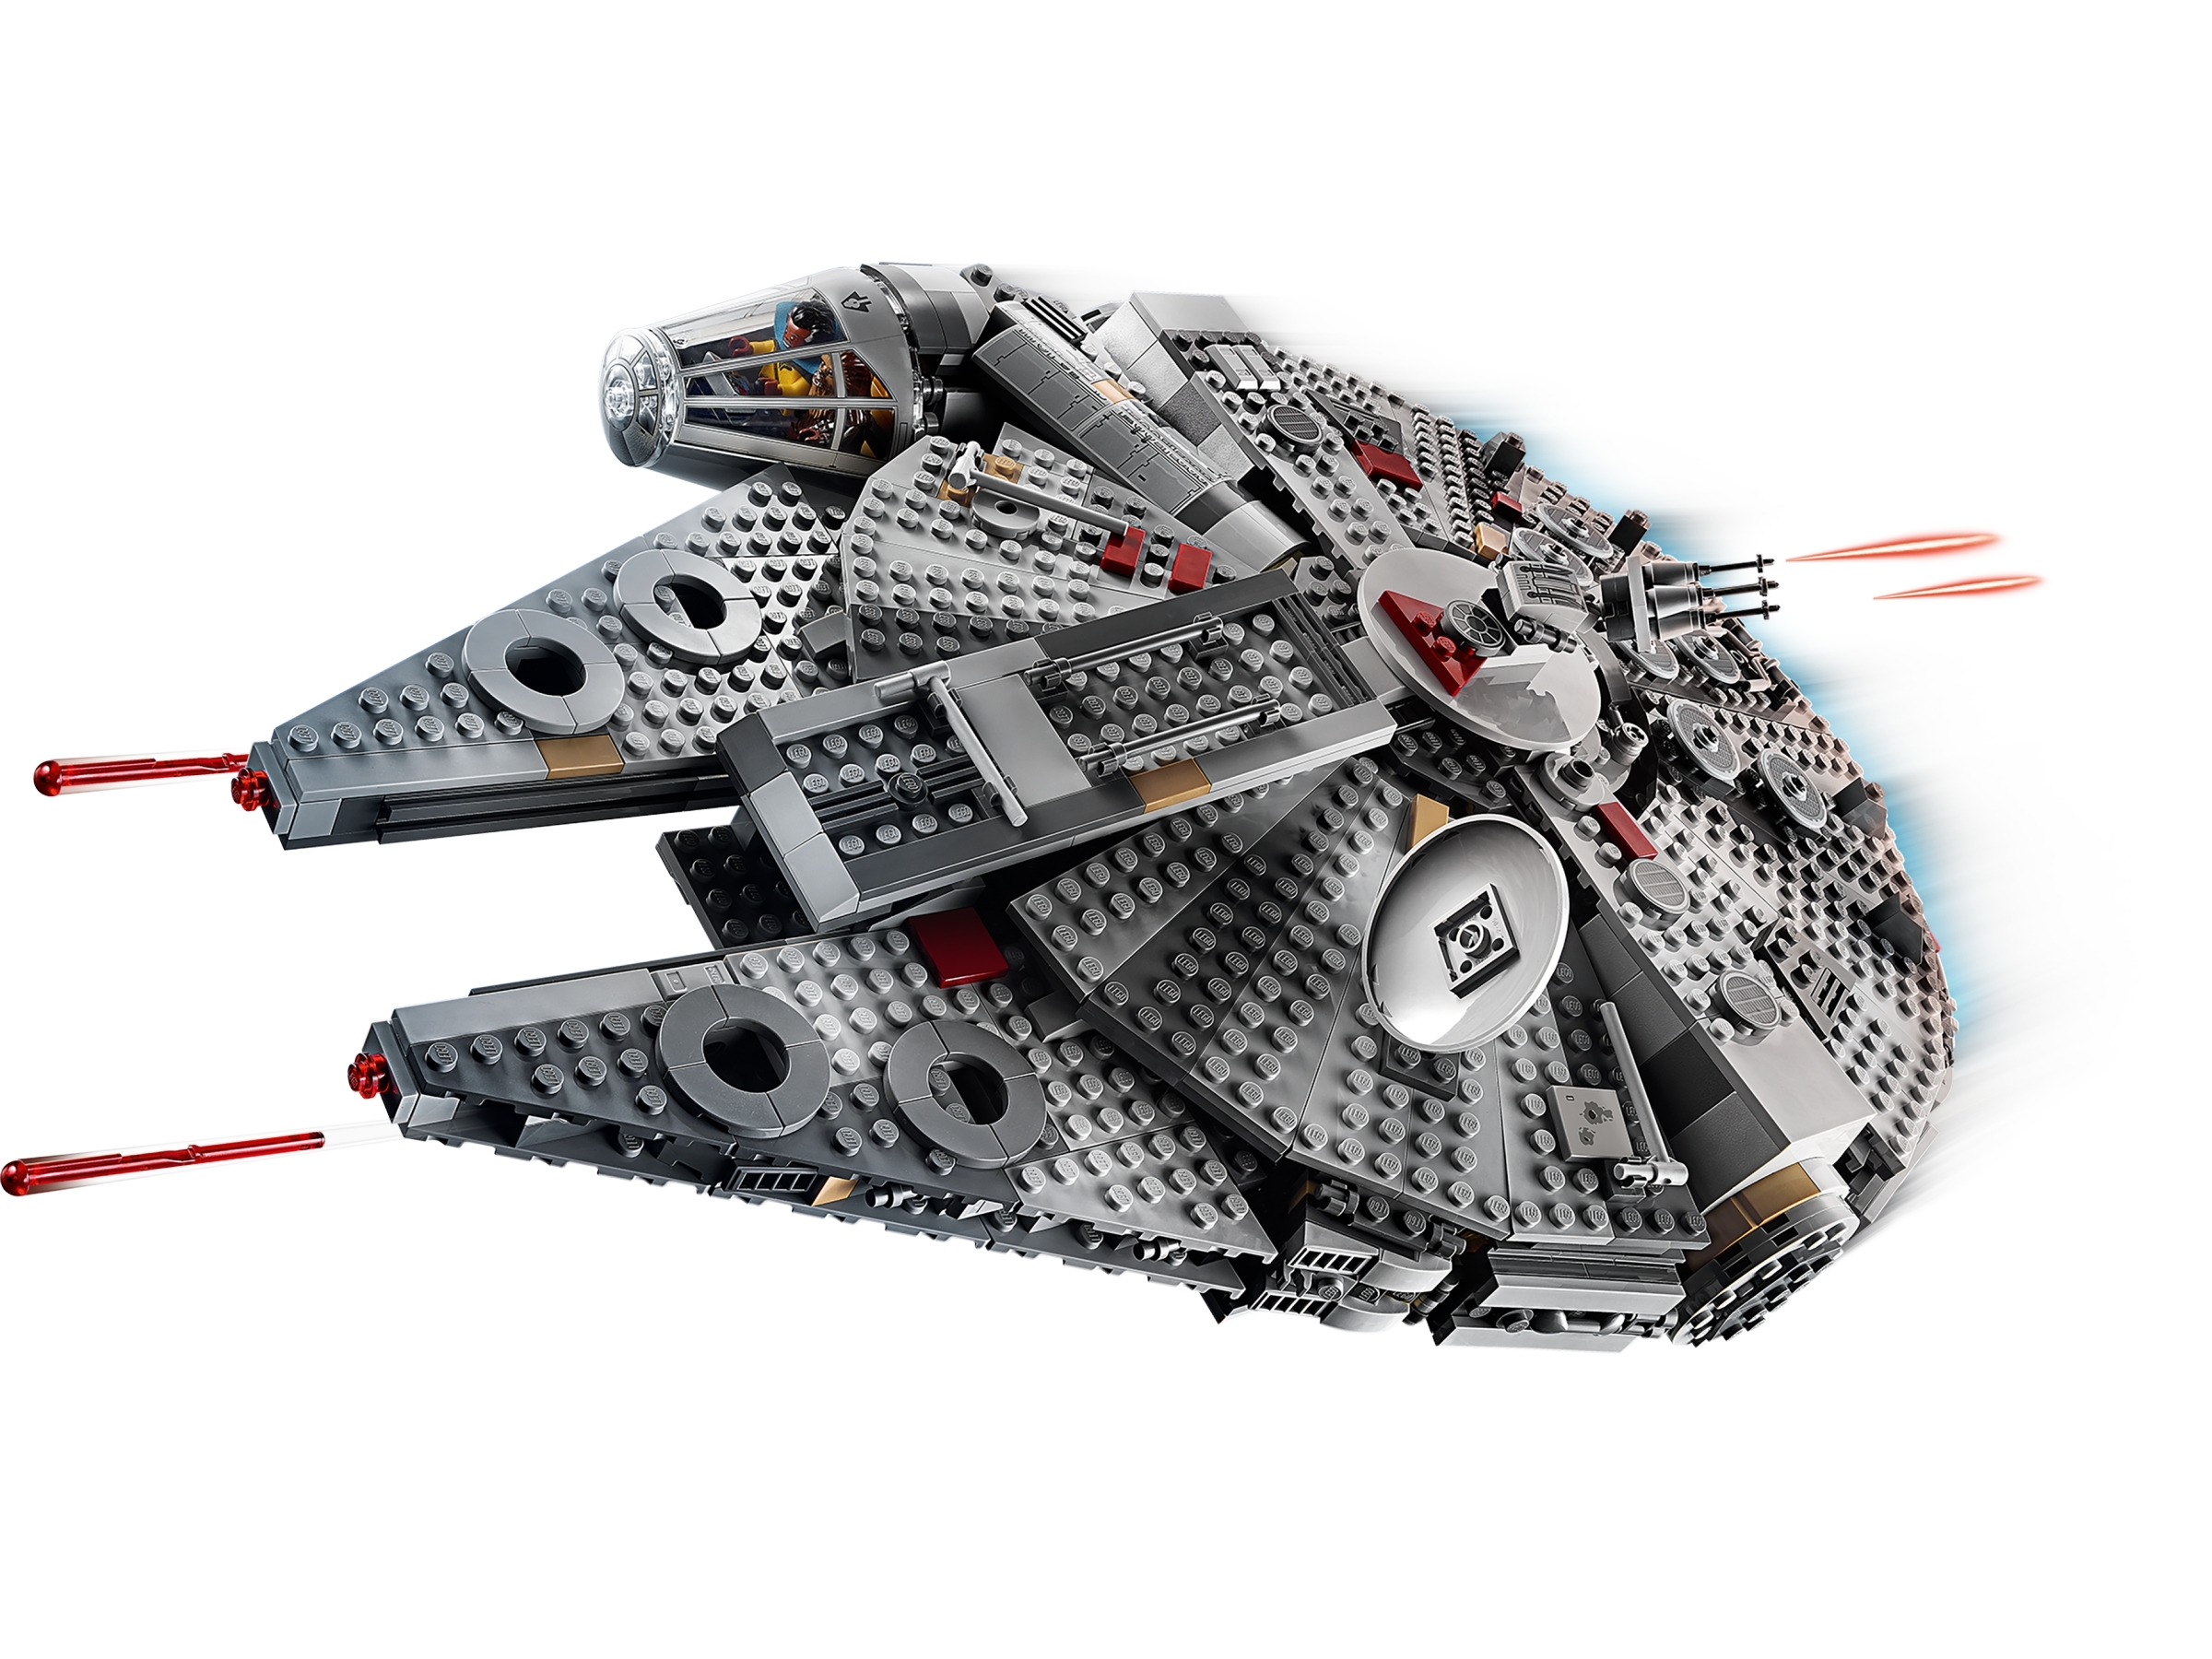 Millennium Falcon™ 75257 | Star Wars™ | Buy online at the Official